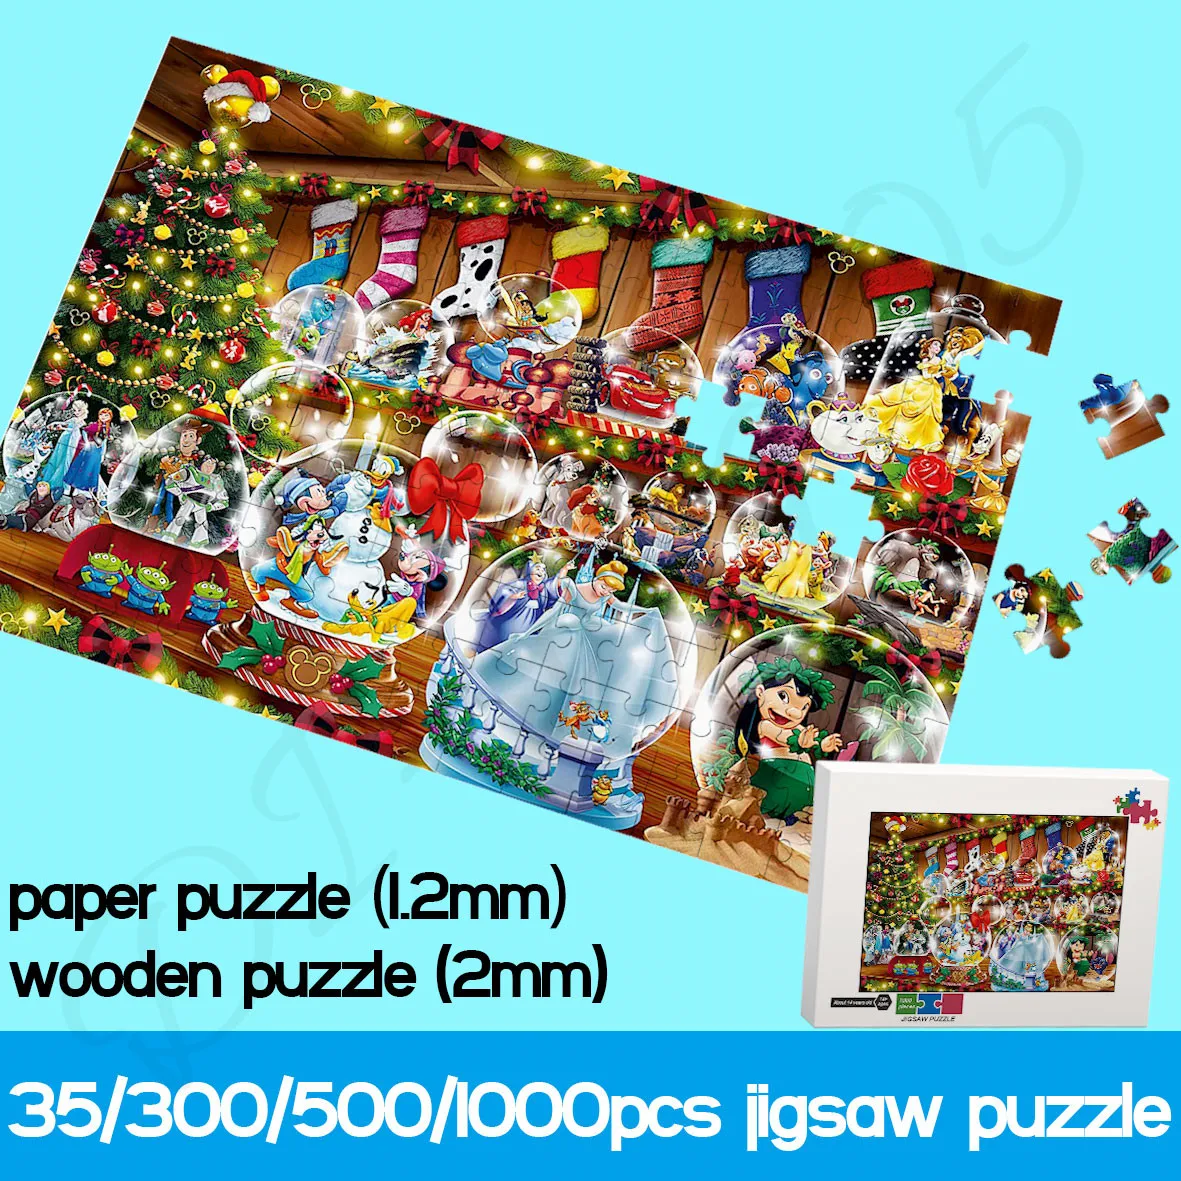 Puzzles for Kids Disney Famous Characters 35/300/500/1000 Piece Paper and Wooden Jigsaw Puzzles Handmade Art Educational Toys bristlegrass wooden jigsaw puzzles 500 1000 piece yidam tibetan buddhist art thangka painting educational toy collectibles decor